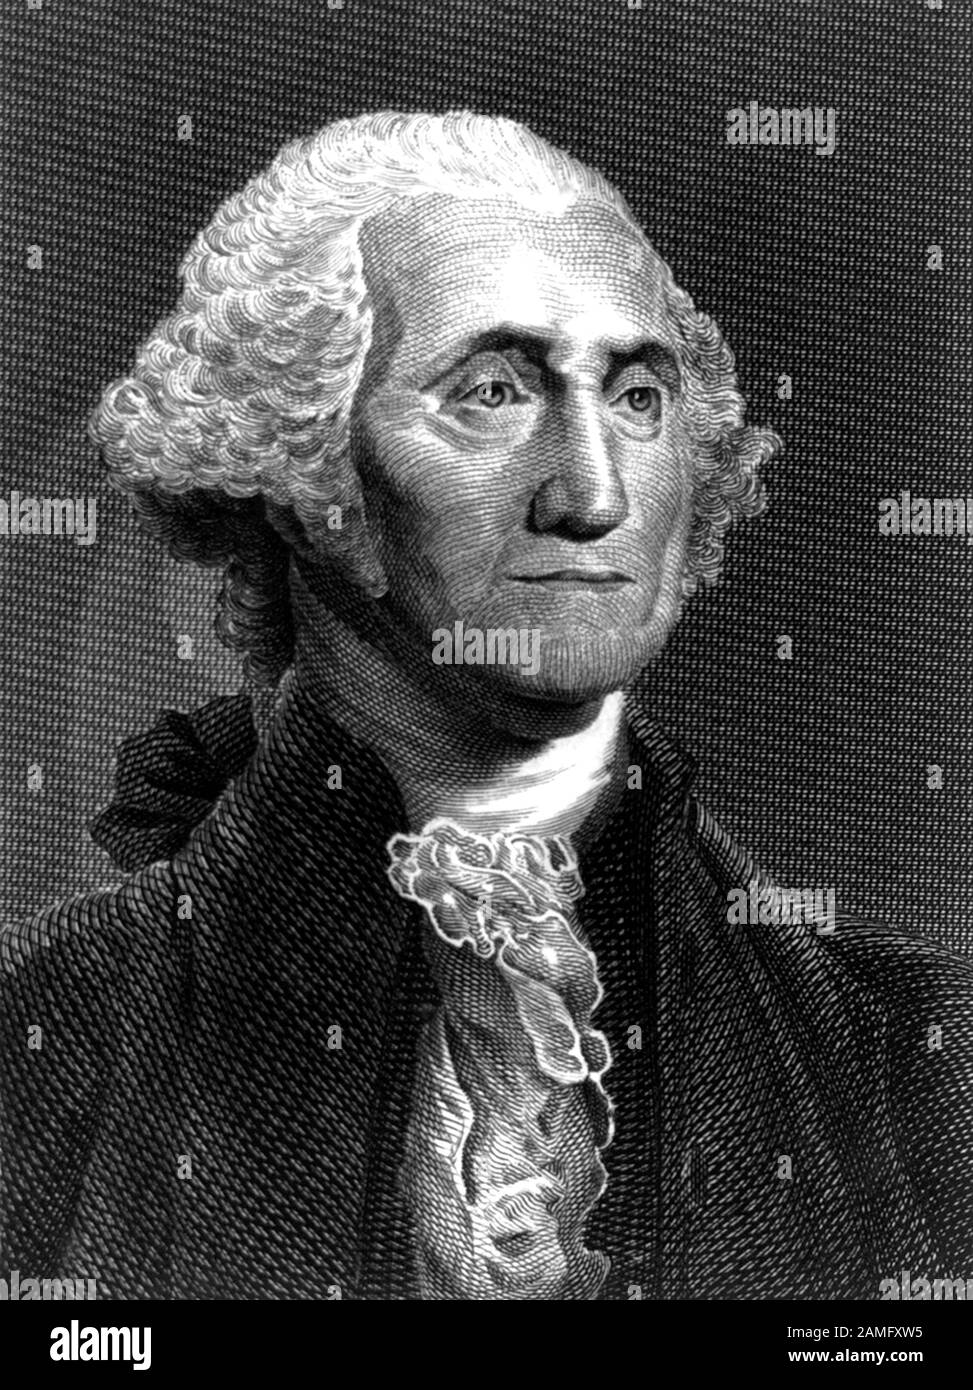 Vintage portrait of George Washington (1732 - 1799) – Commander of the Continental Army in the American Revolutionary War / War of Independence (1775 – 1783) and the first US President (1789 - 1797). Undated print from an engraving by S Topham after a painting by artist Gilbert Stuart (1755 – 1828). Stock Photo